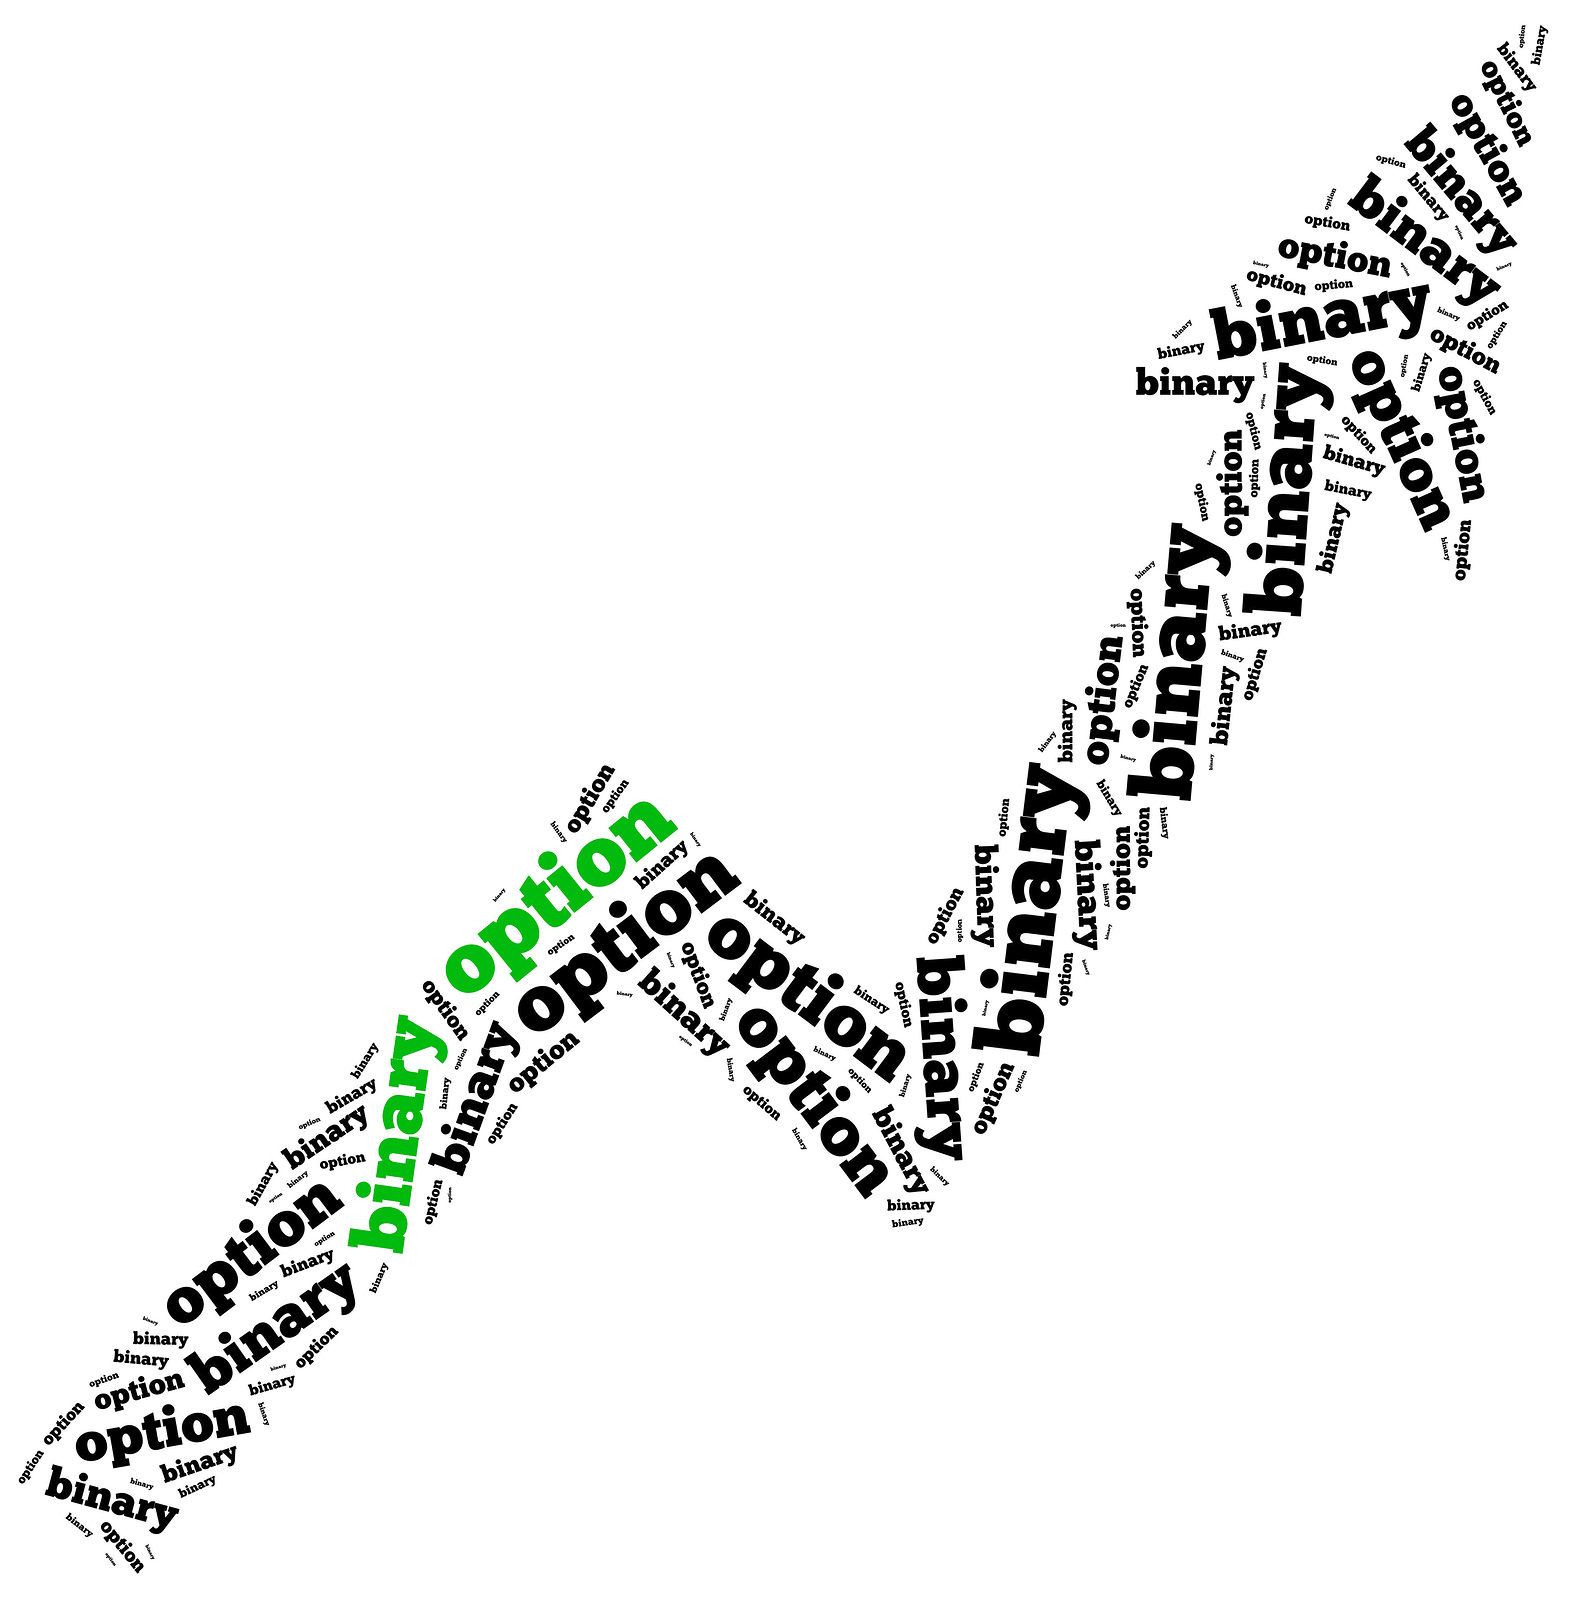 Word cloud illustration related to binary option growth.